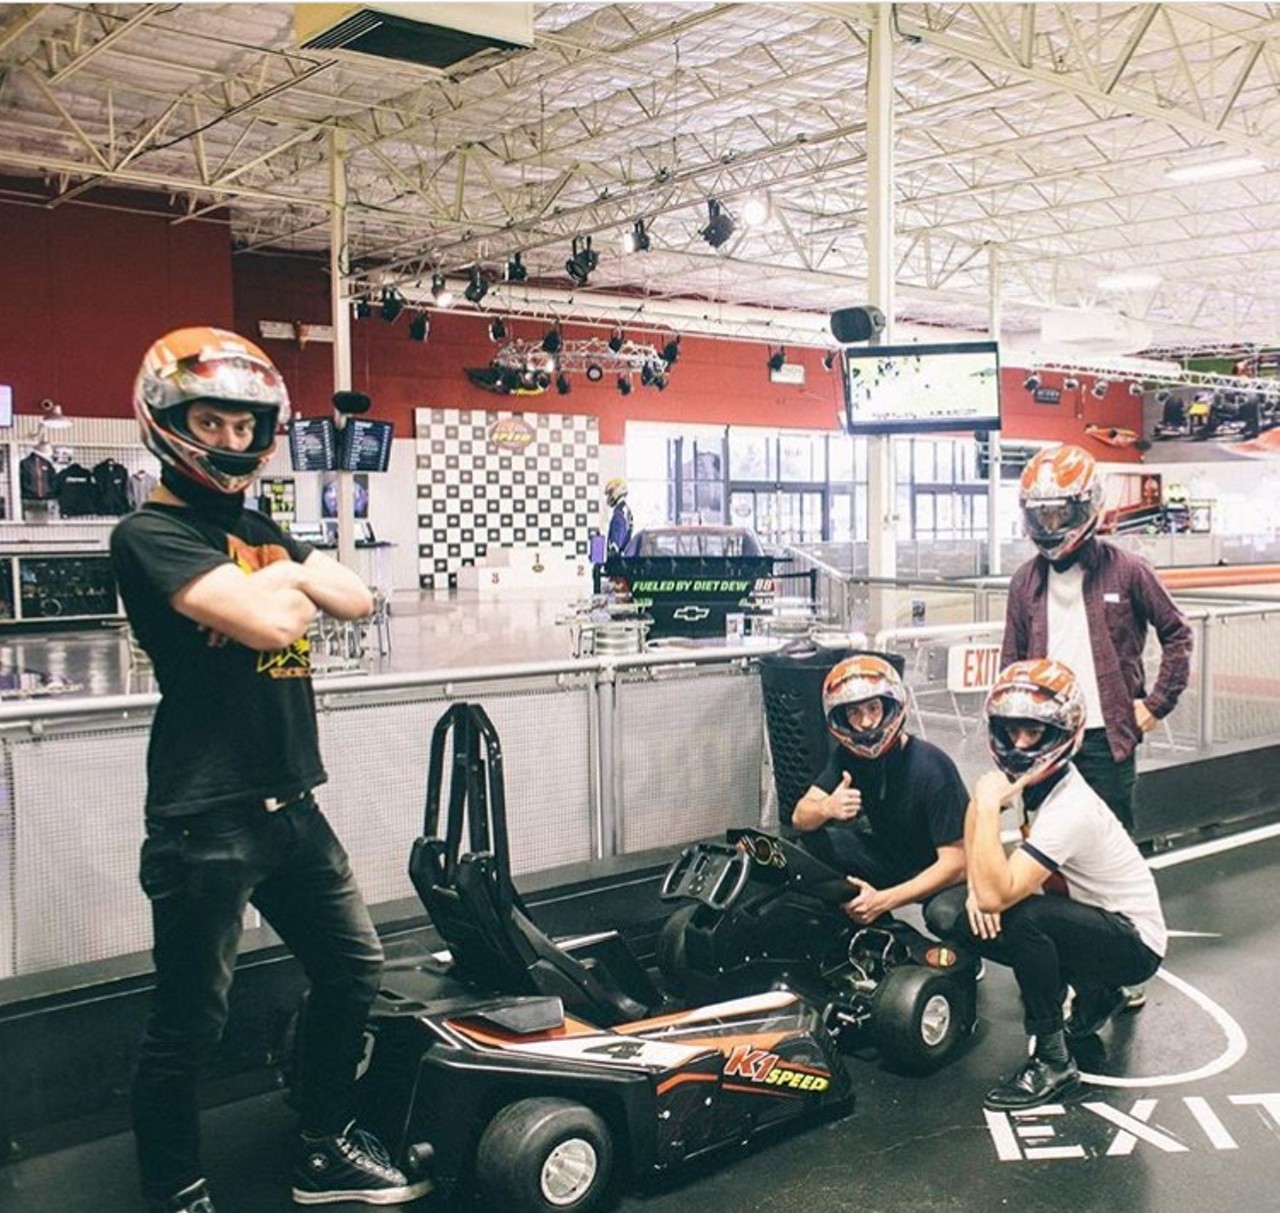 K1 Speed
6955 Northwest Loop 410, (210) 802-0802, k1speed.com
K1 is a super cool racing center with electric go-karting for all ages. The track is perfect for novice racers or more extreme sportsman looking to introduce their kids to the wonderful activity.
Photo via Instagram / dreamersjoinus